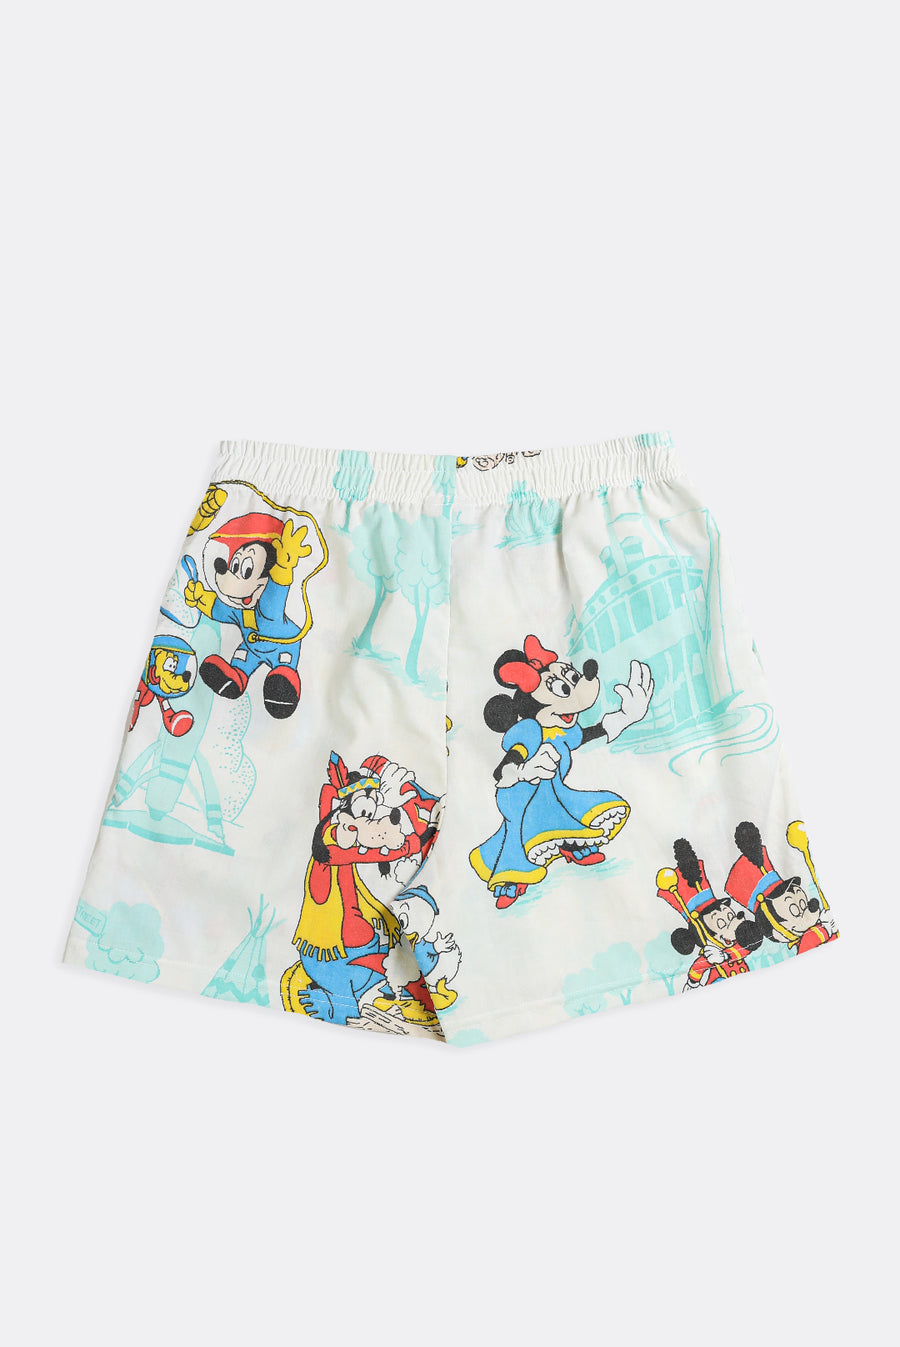 Unisex Rework Mickey and Friends Boxer Shorts - XS, M